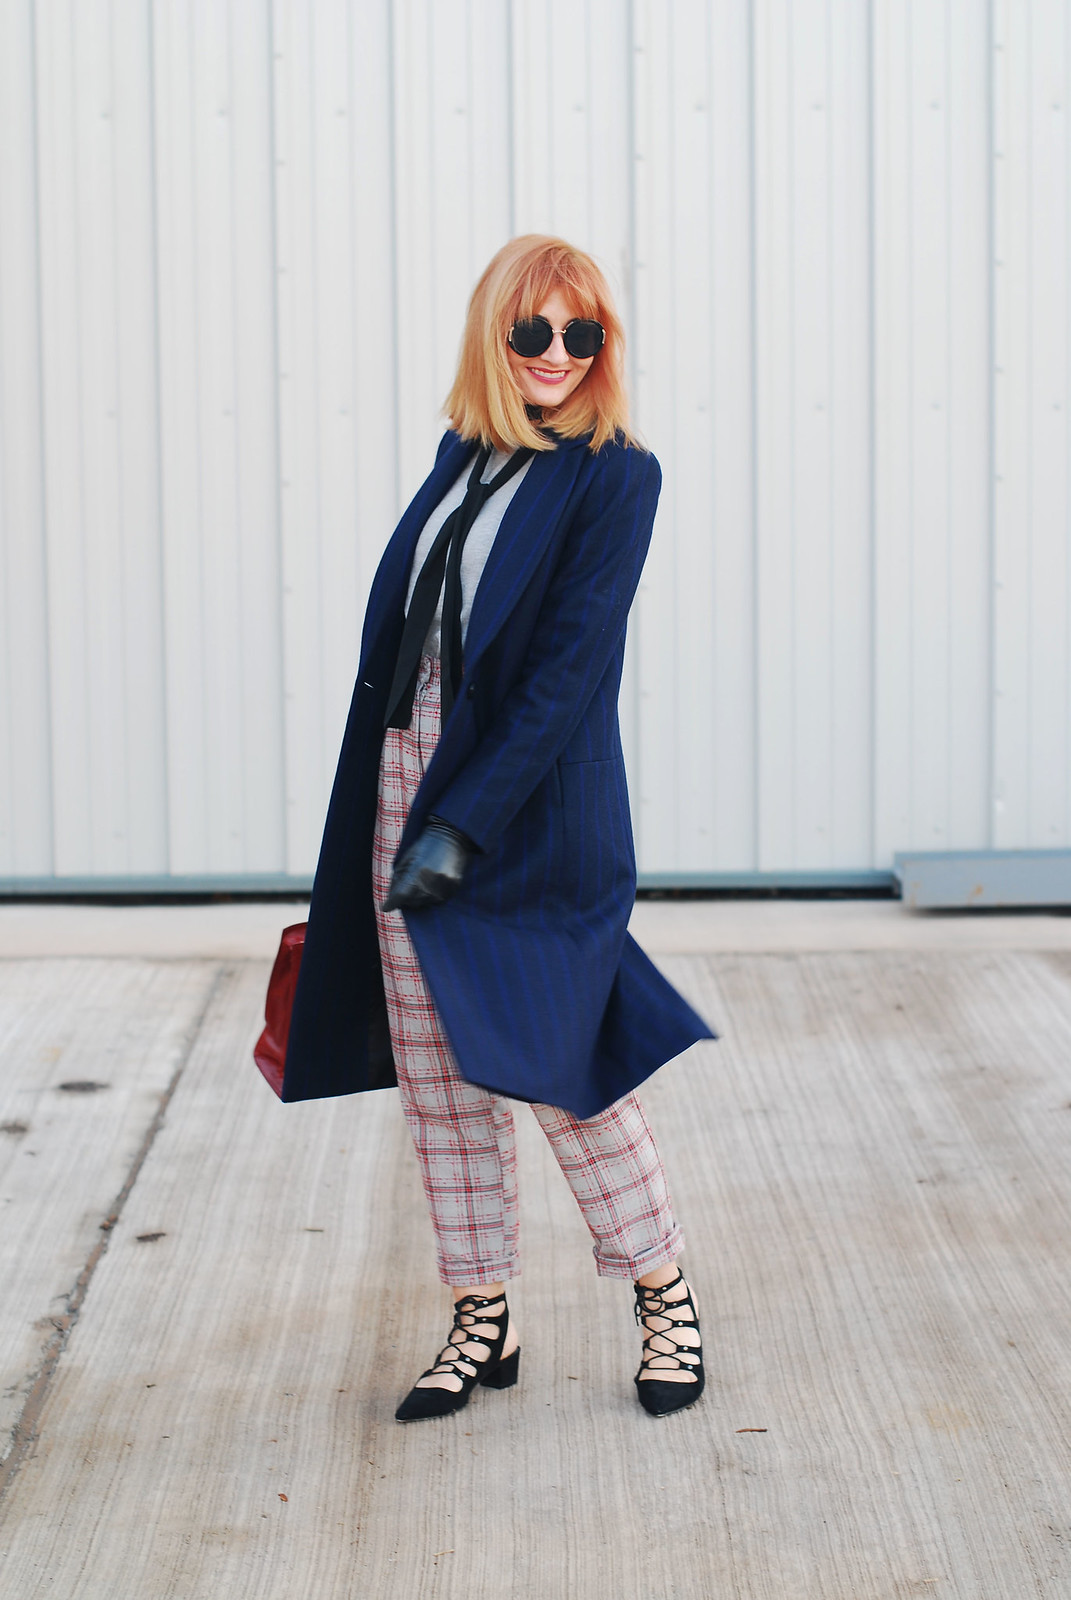 Smart autumn/winter outfit fall style long navy pinstripe coat, check trousers, heeled ghillie shoes and black skinny scarf | Not Dressed As Lamb, over 40 style